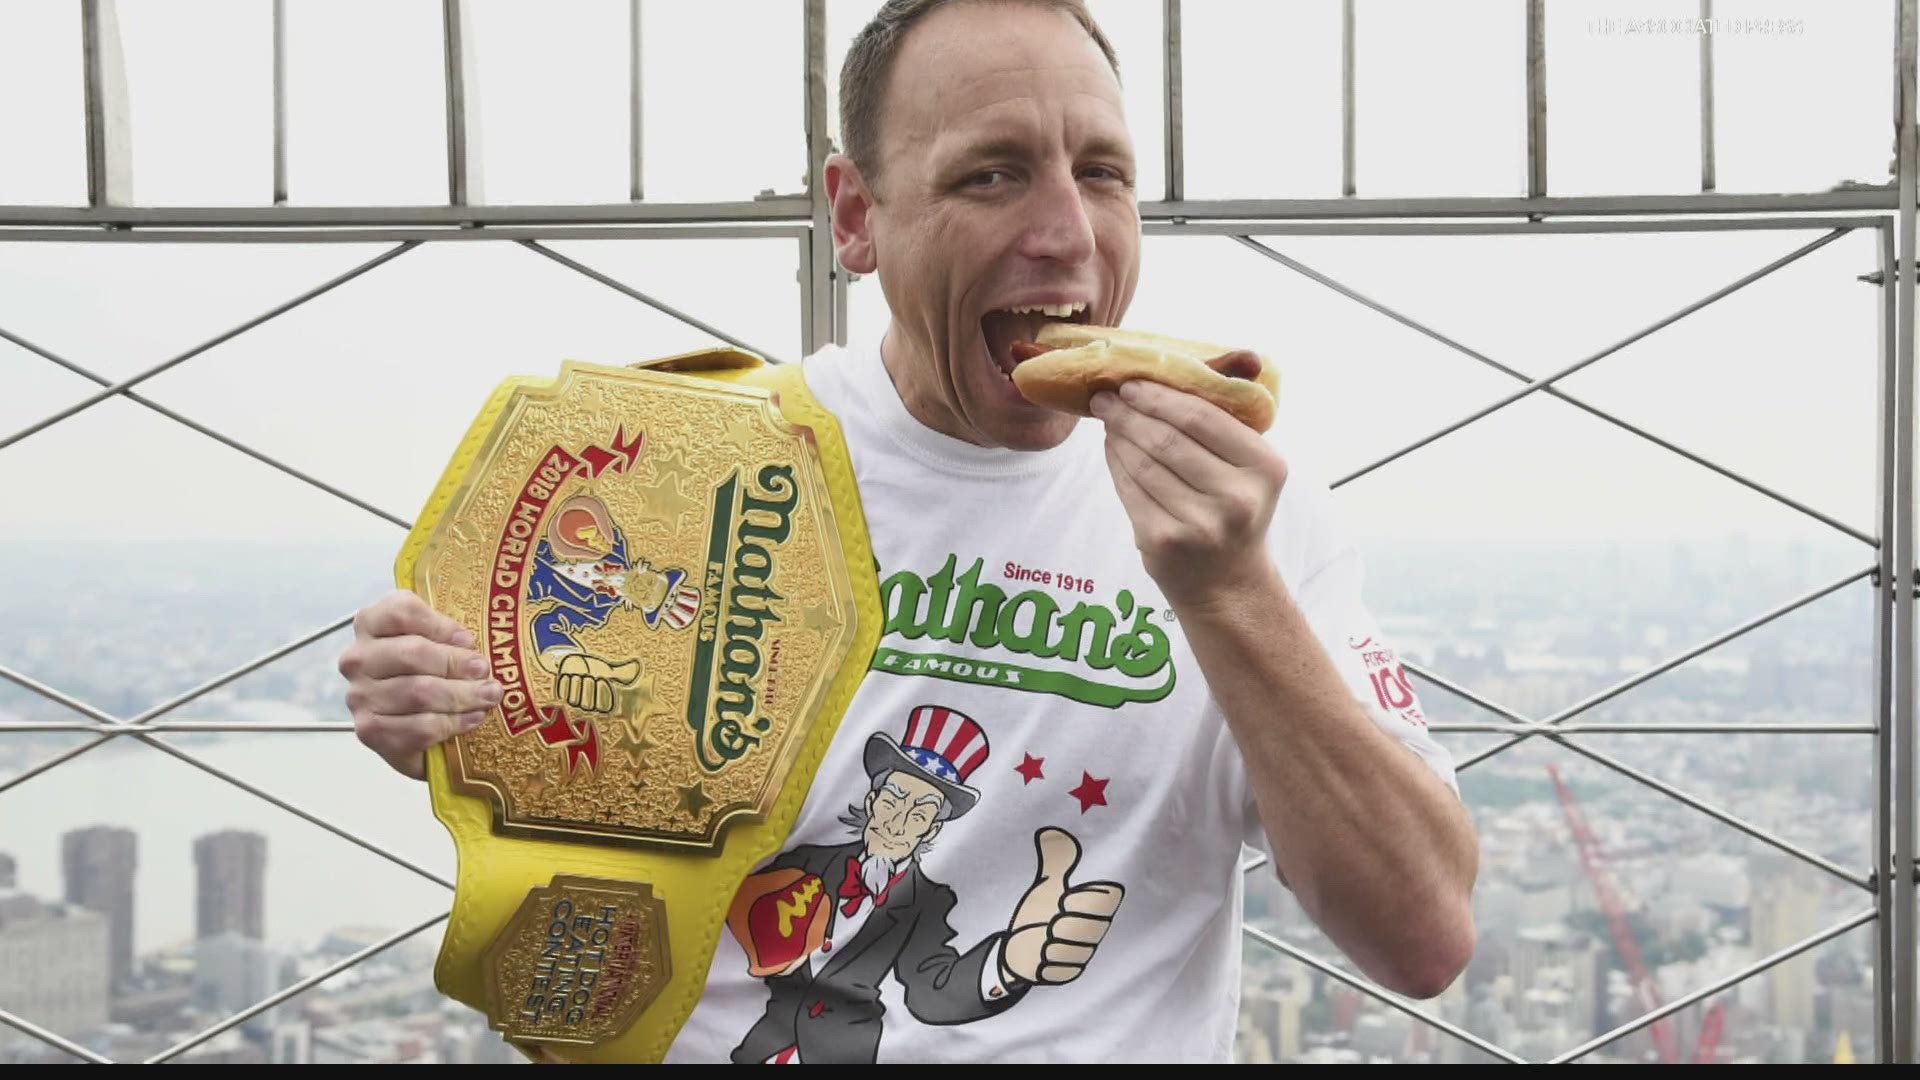 It's been less than two weeks since Joey Chestnut won another Nathan’s Hot Dog Eating Contest, and now he's settled into his new home of Westfield, IN.